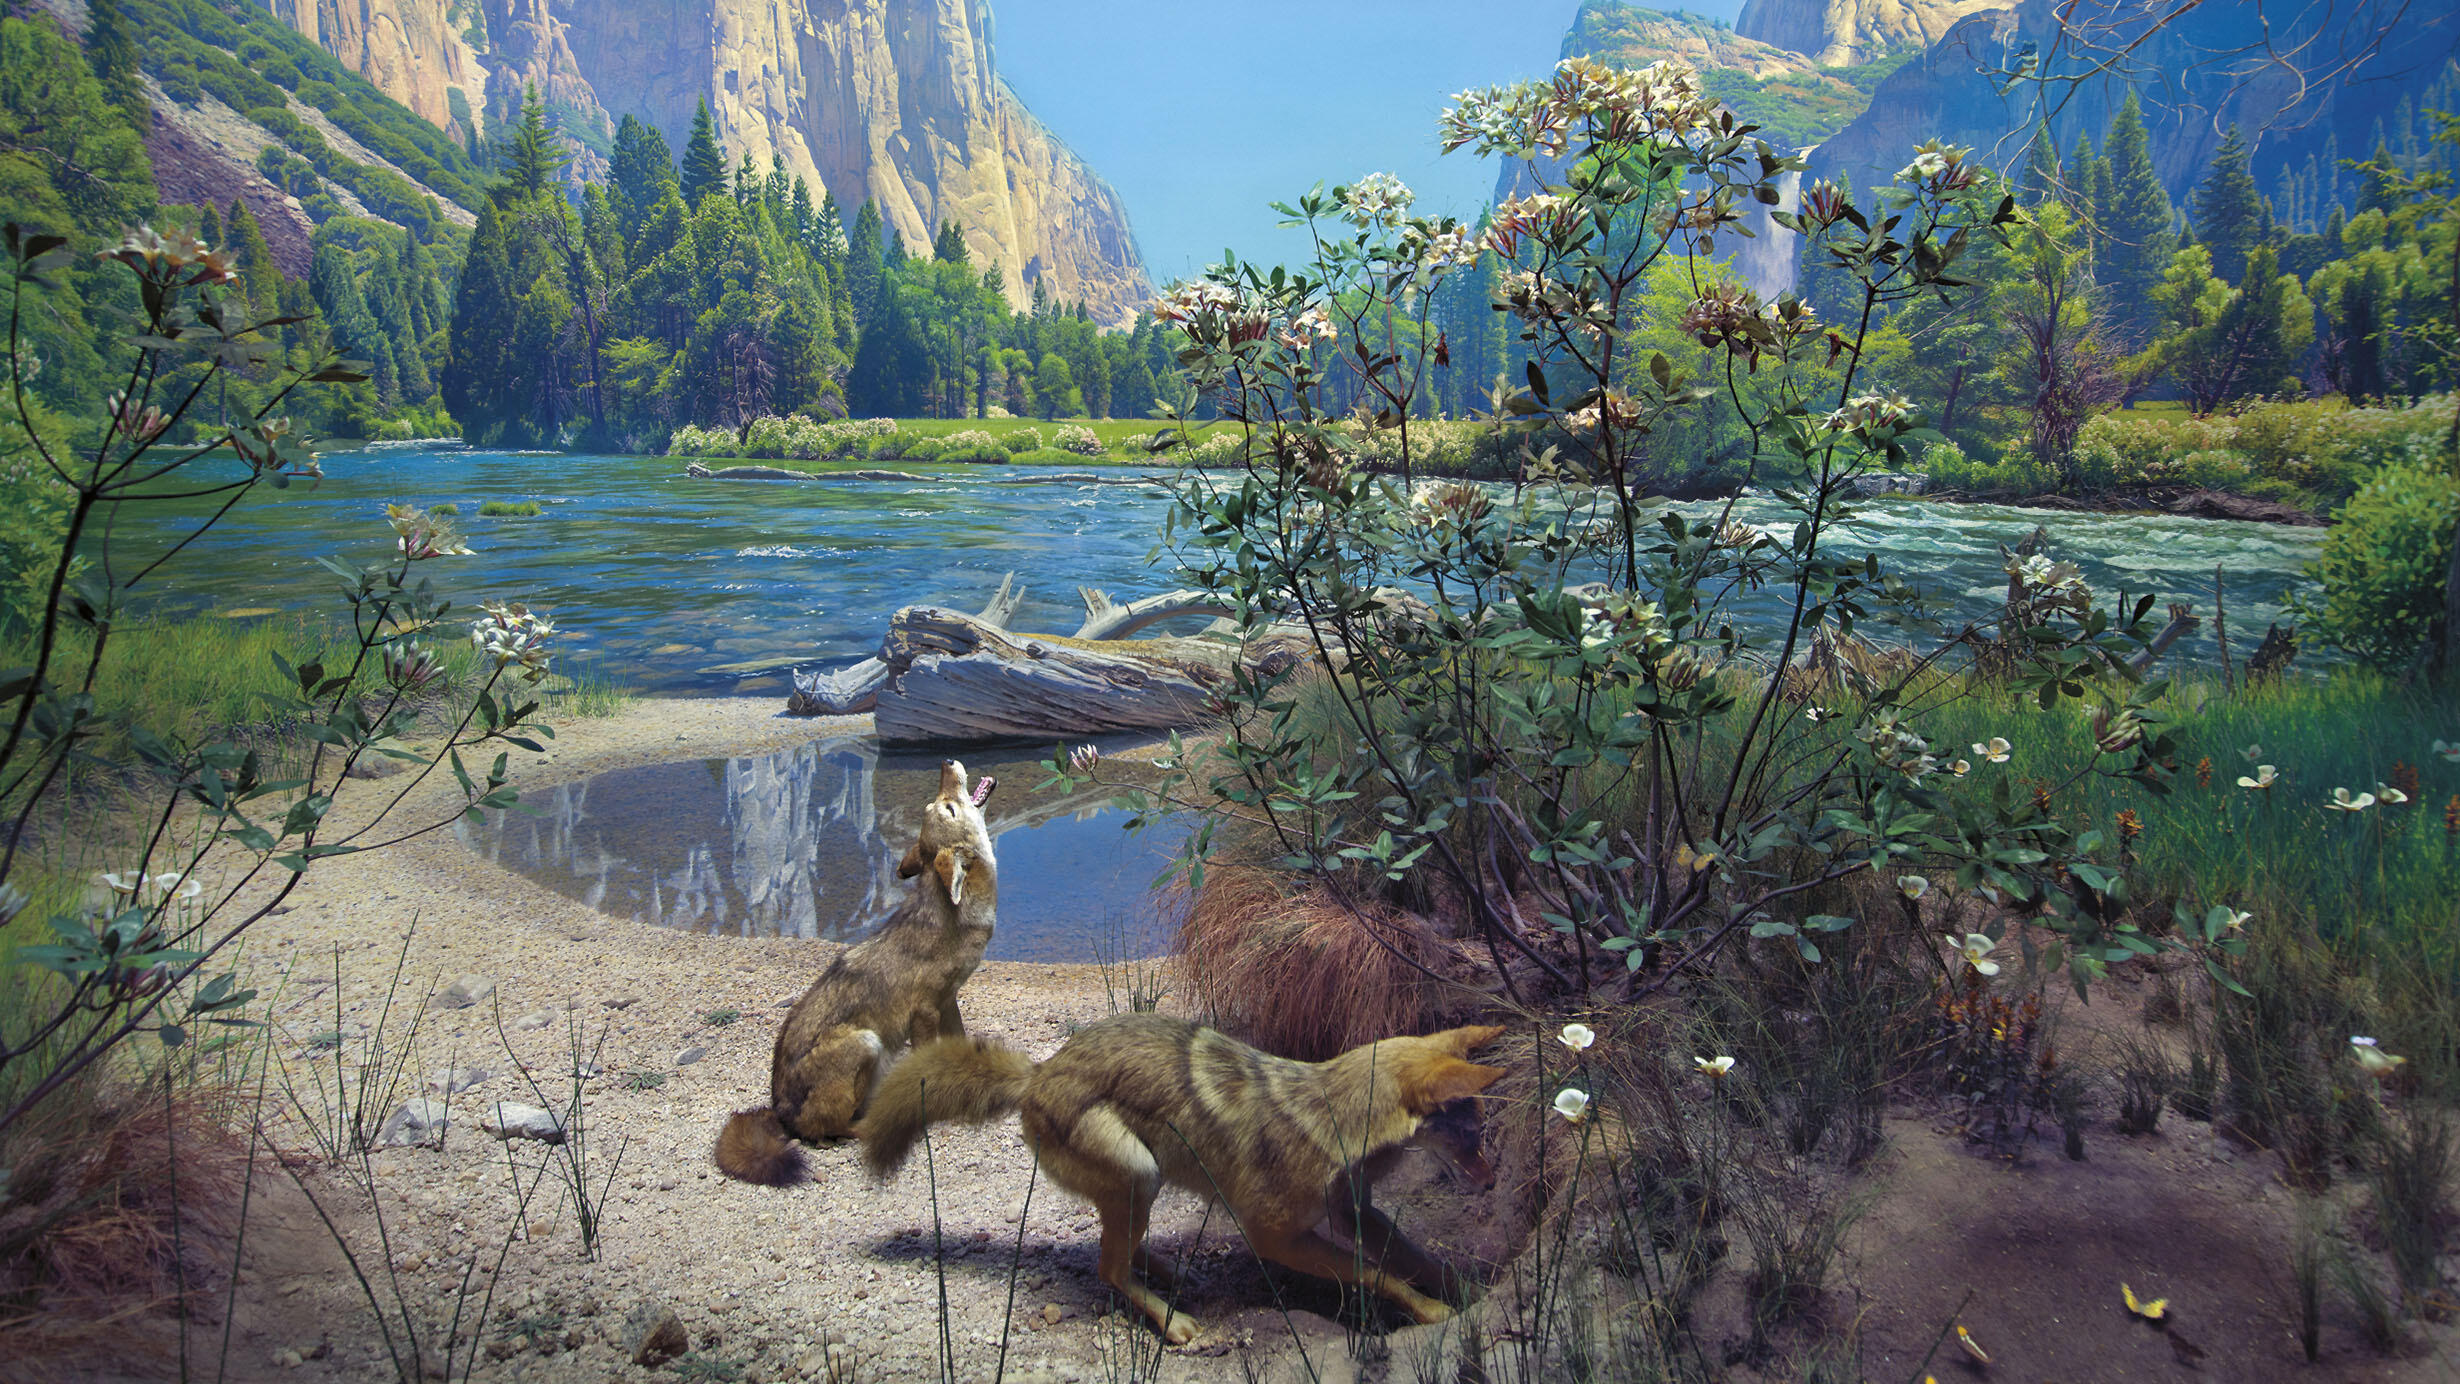 Museum diorama depicts two coyotes in Yosemite National Park, California.